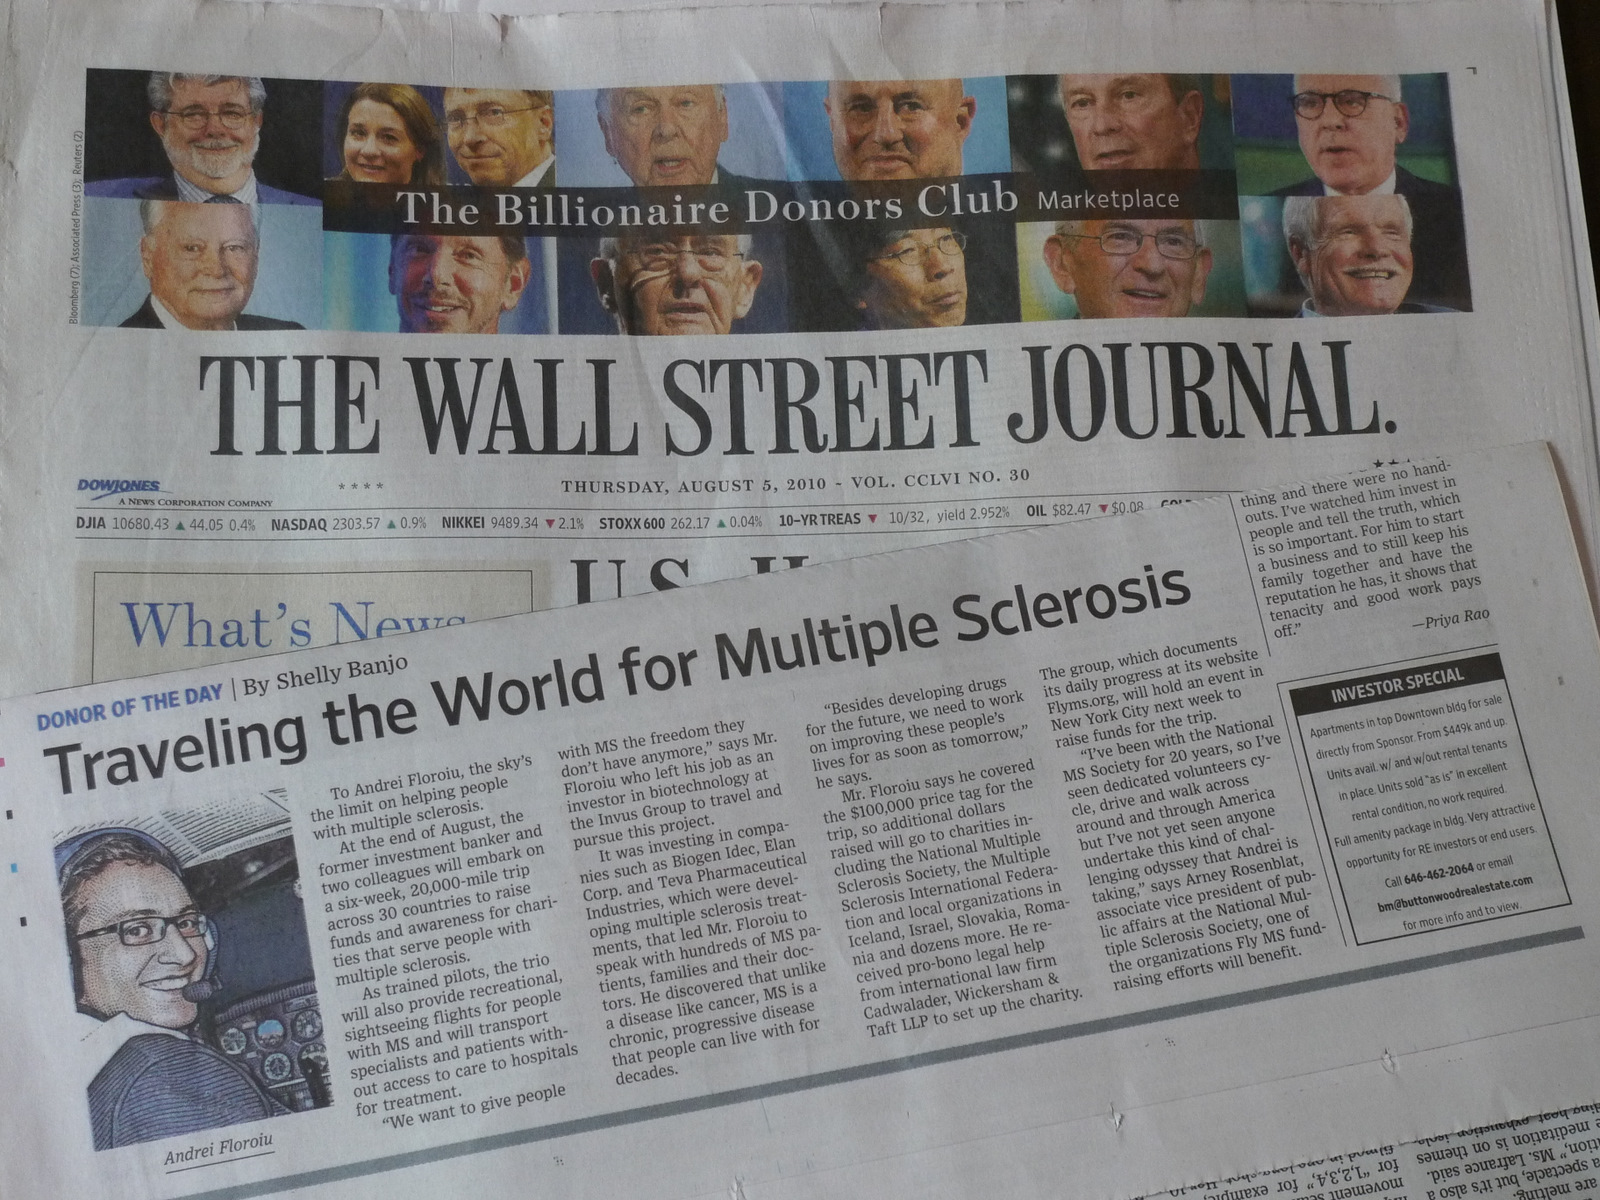 The Wall Street Journal on Fly for MS